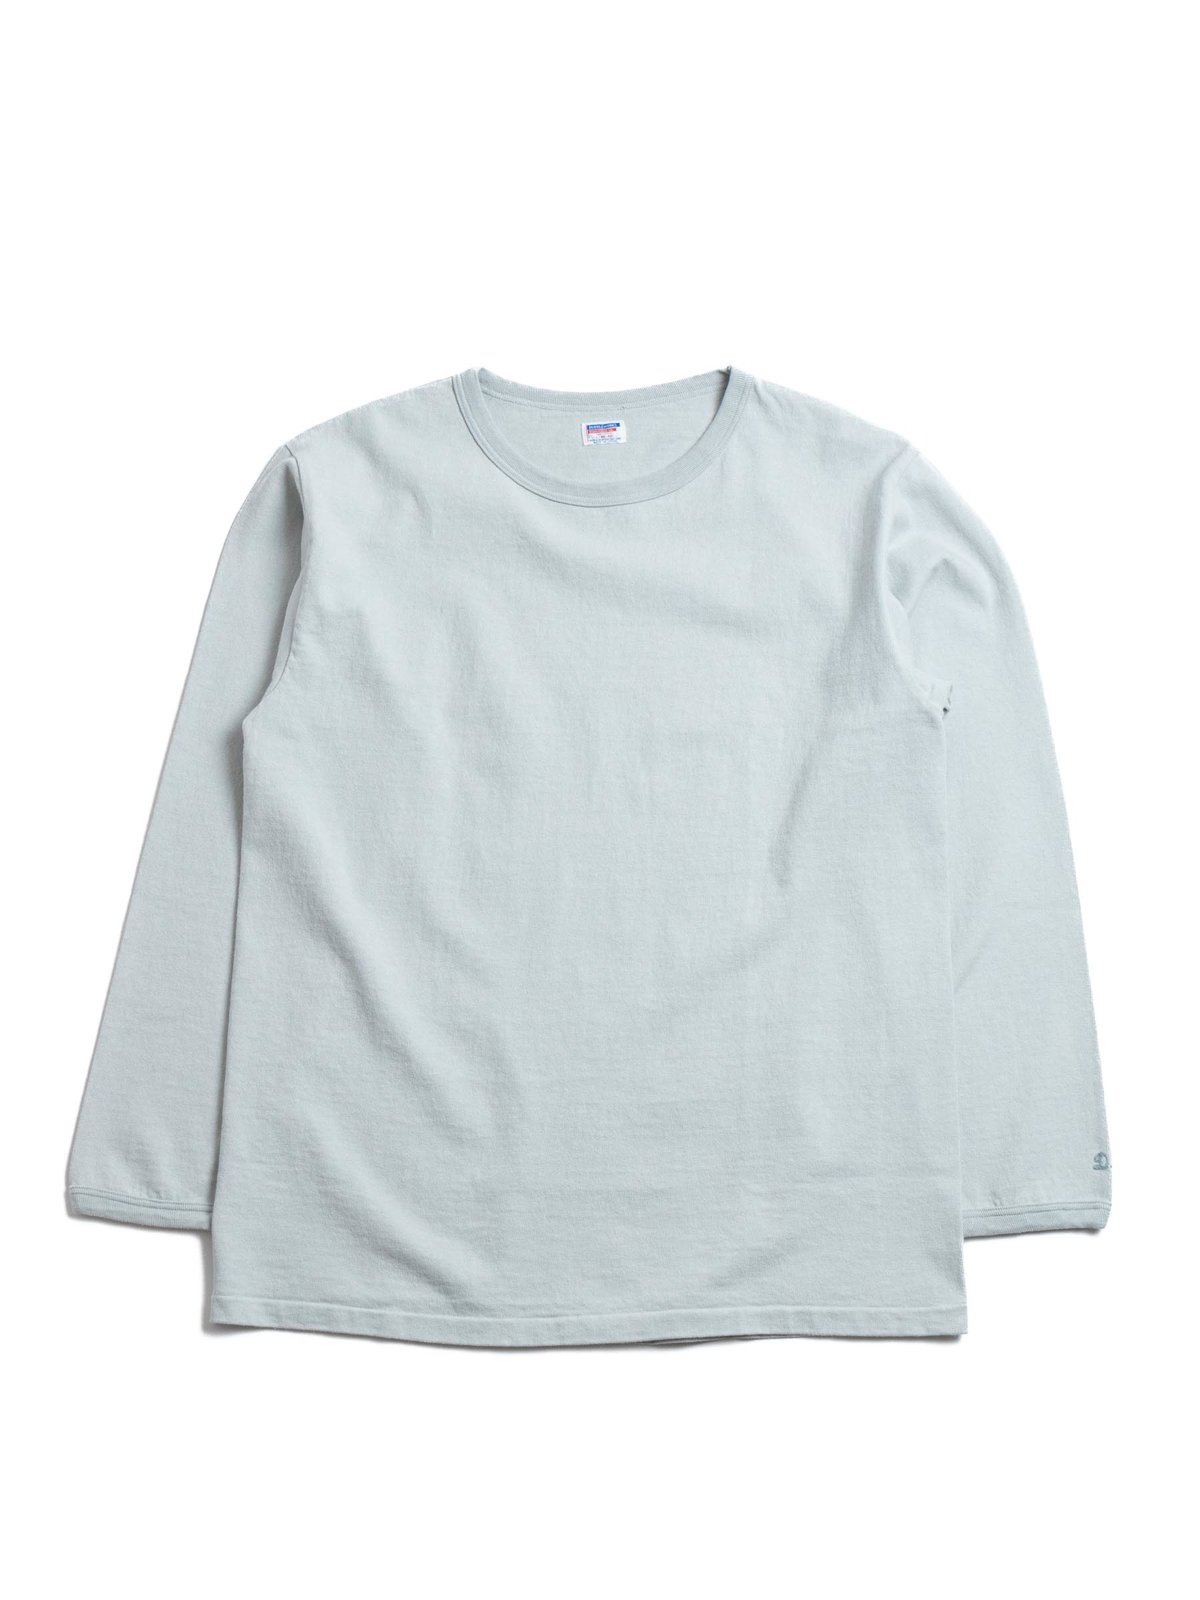 L/S HEAVY WEIGHT TEE SAX by DOUBLEWORKS – The Bureau Belfast - The ...